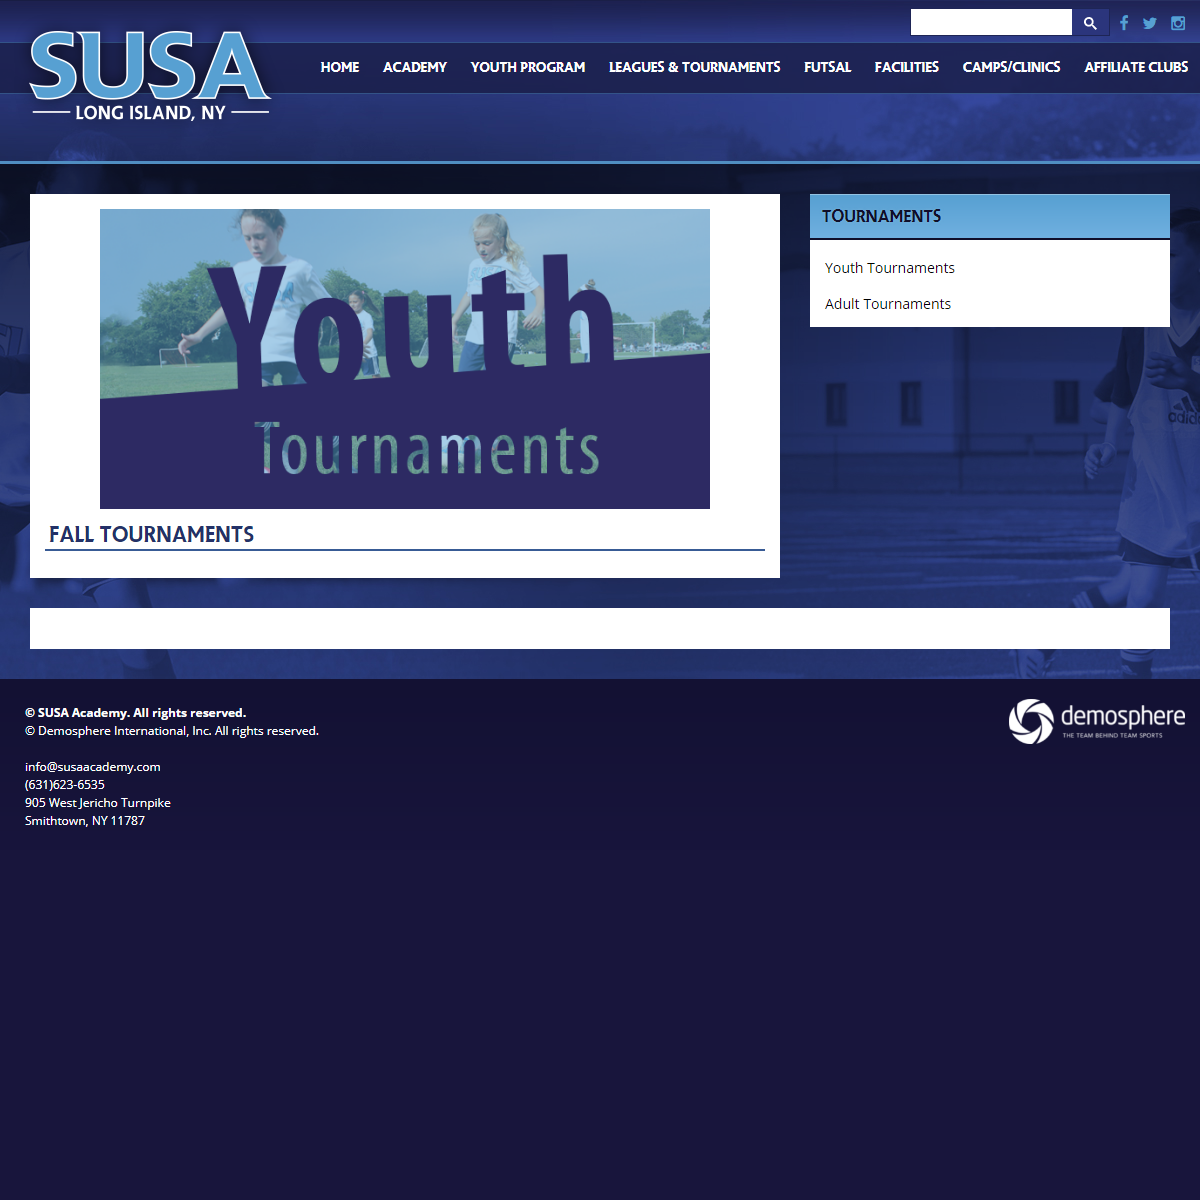 A complete backup of https://www.susaacademy.com/leagues-tournaments/tournaments